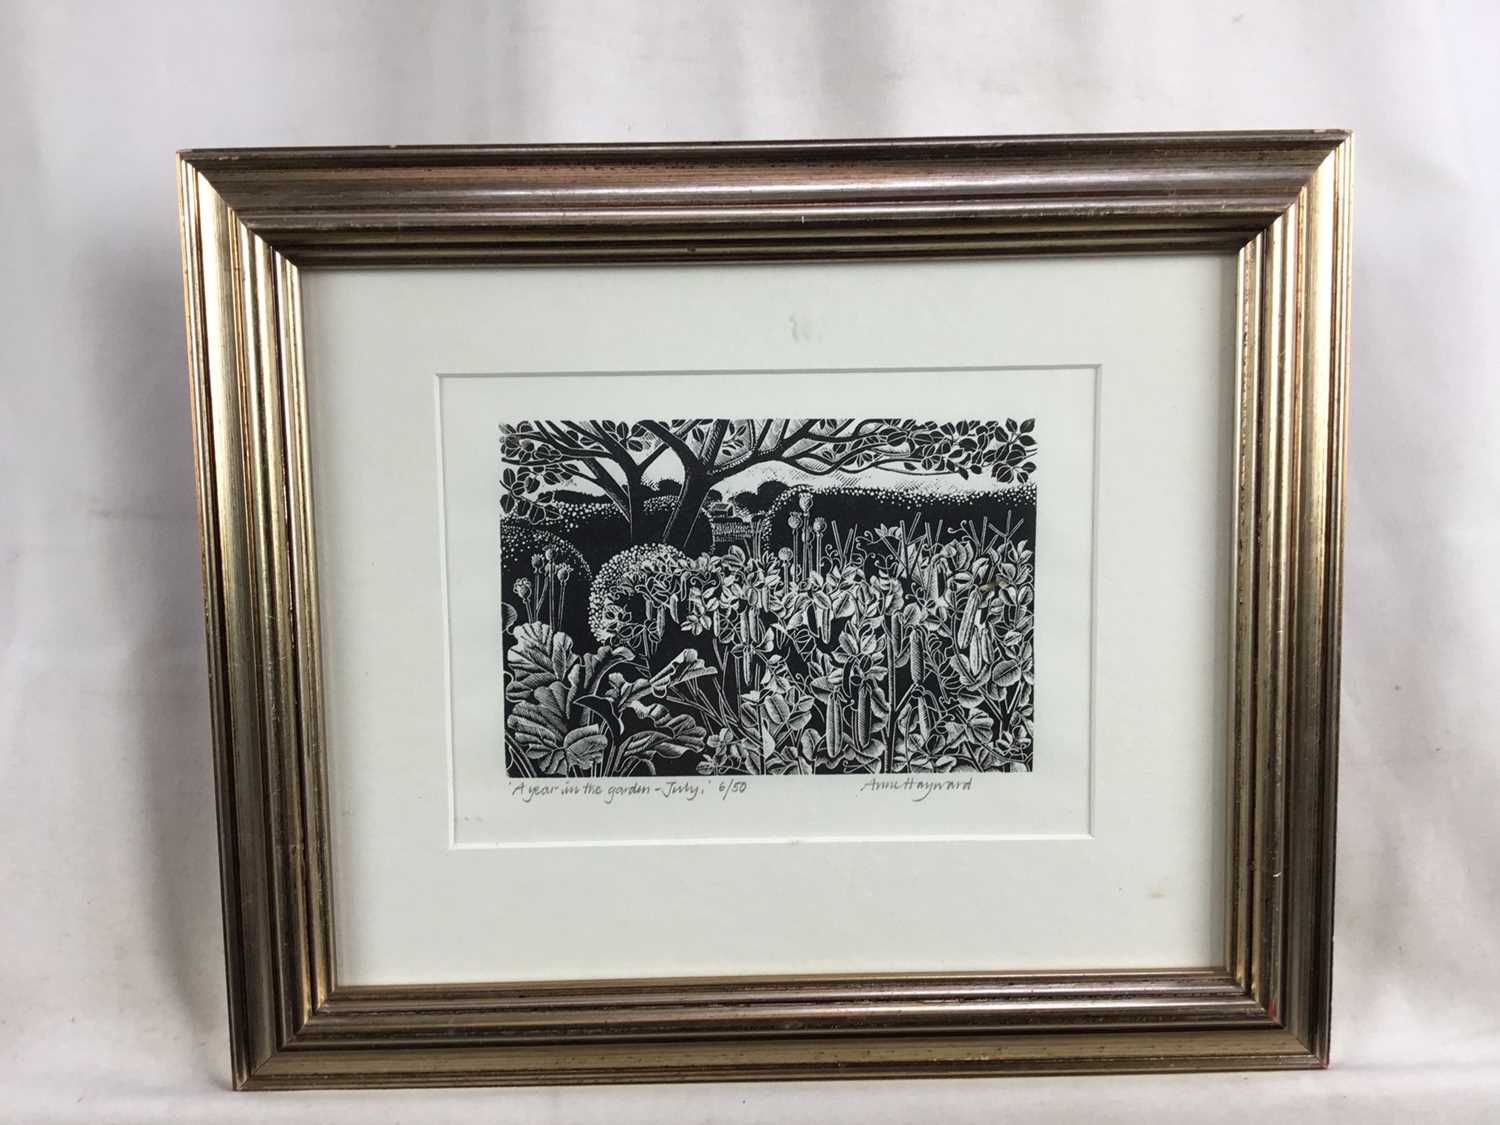 Anne Hayward, contemporary, pair of signed limited edition woodcut engravings, “A Year In The Garden - Image 4 of 5